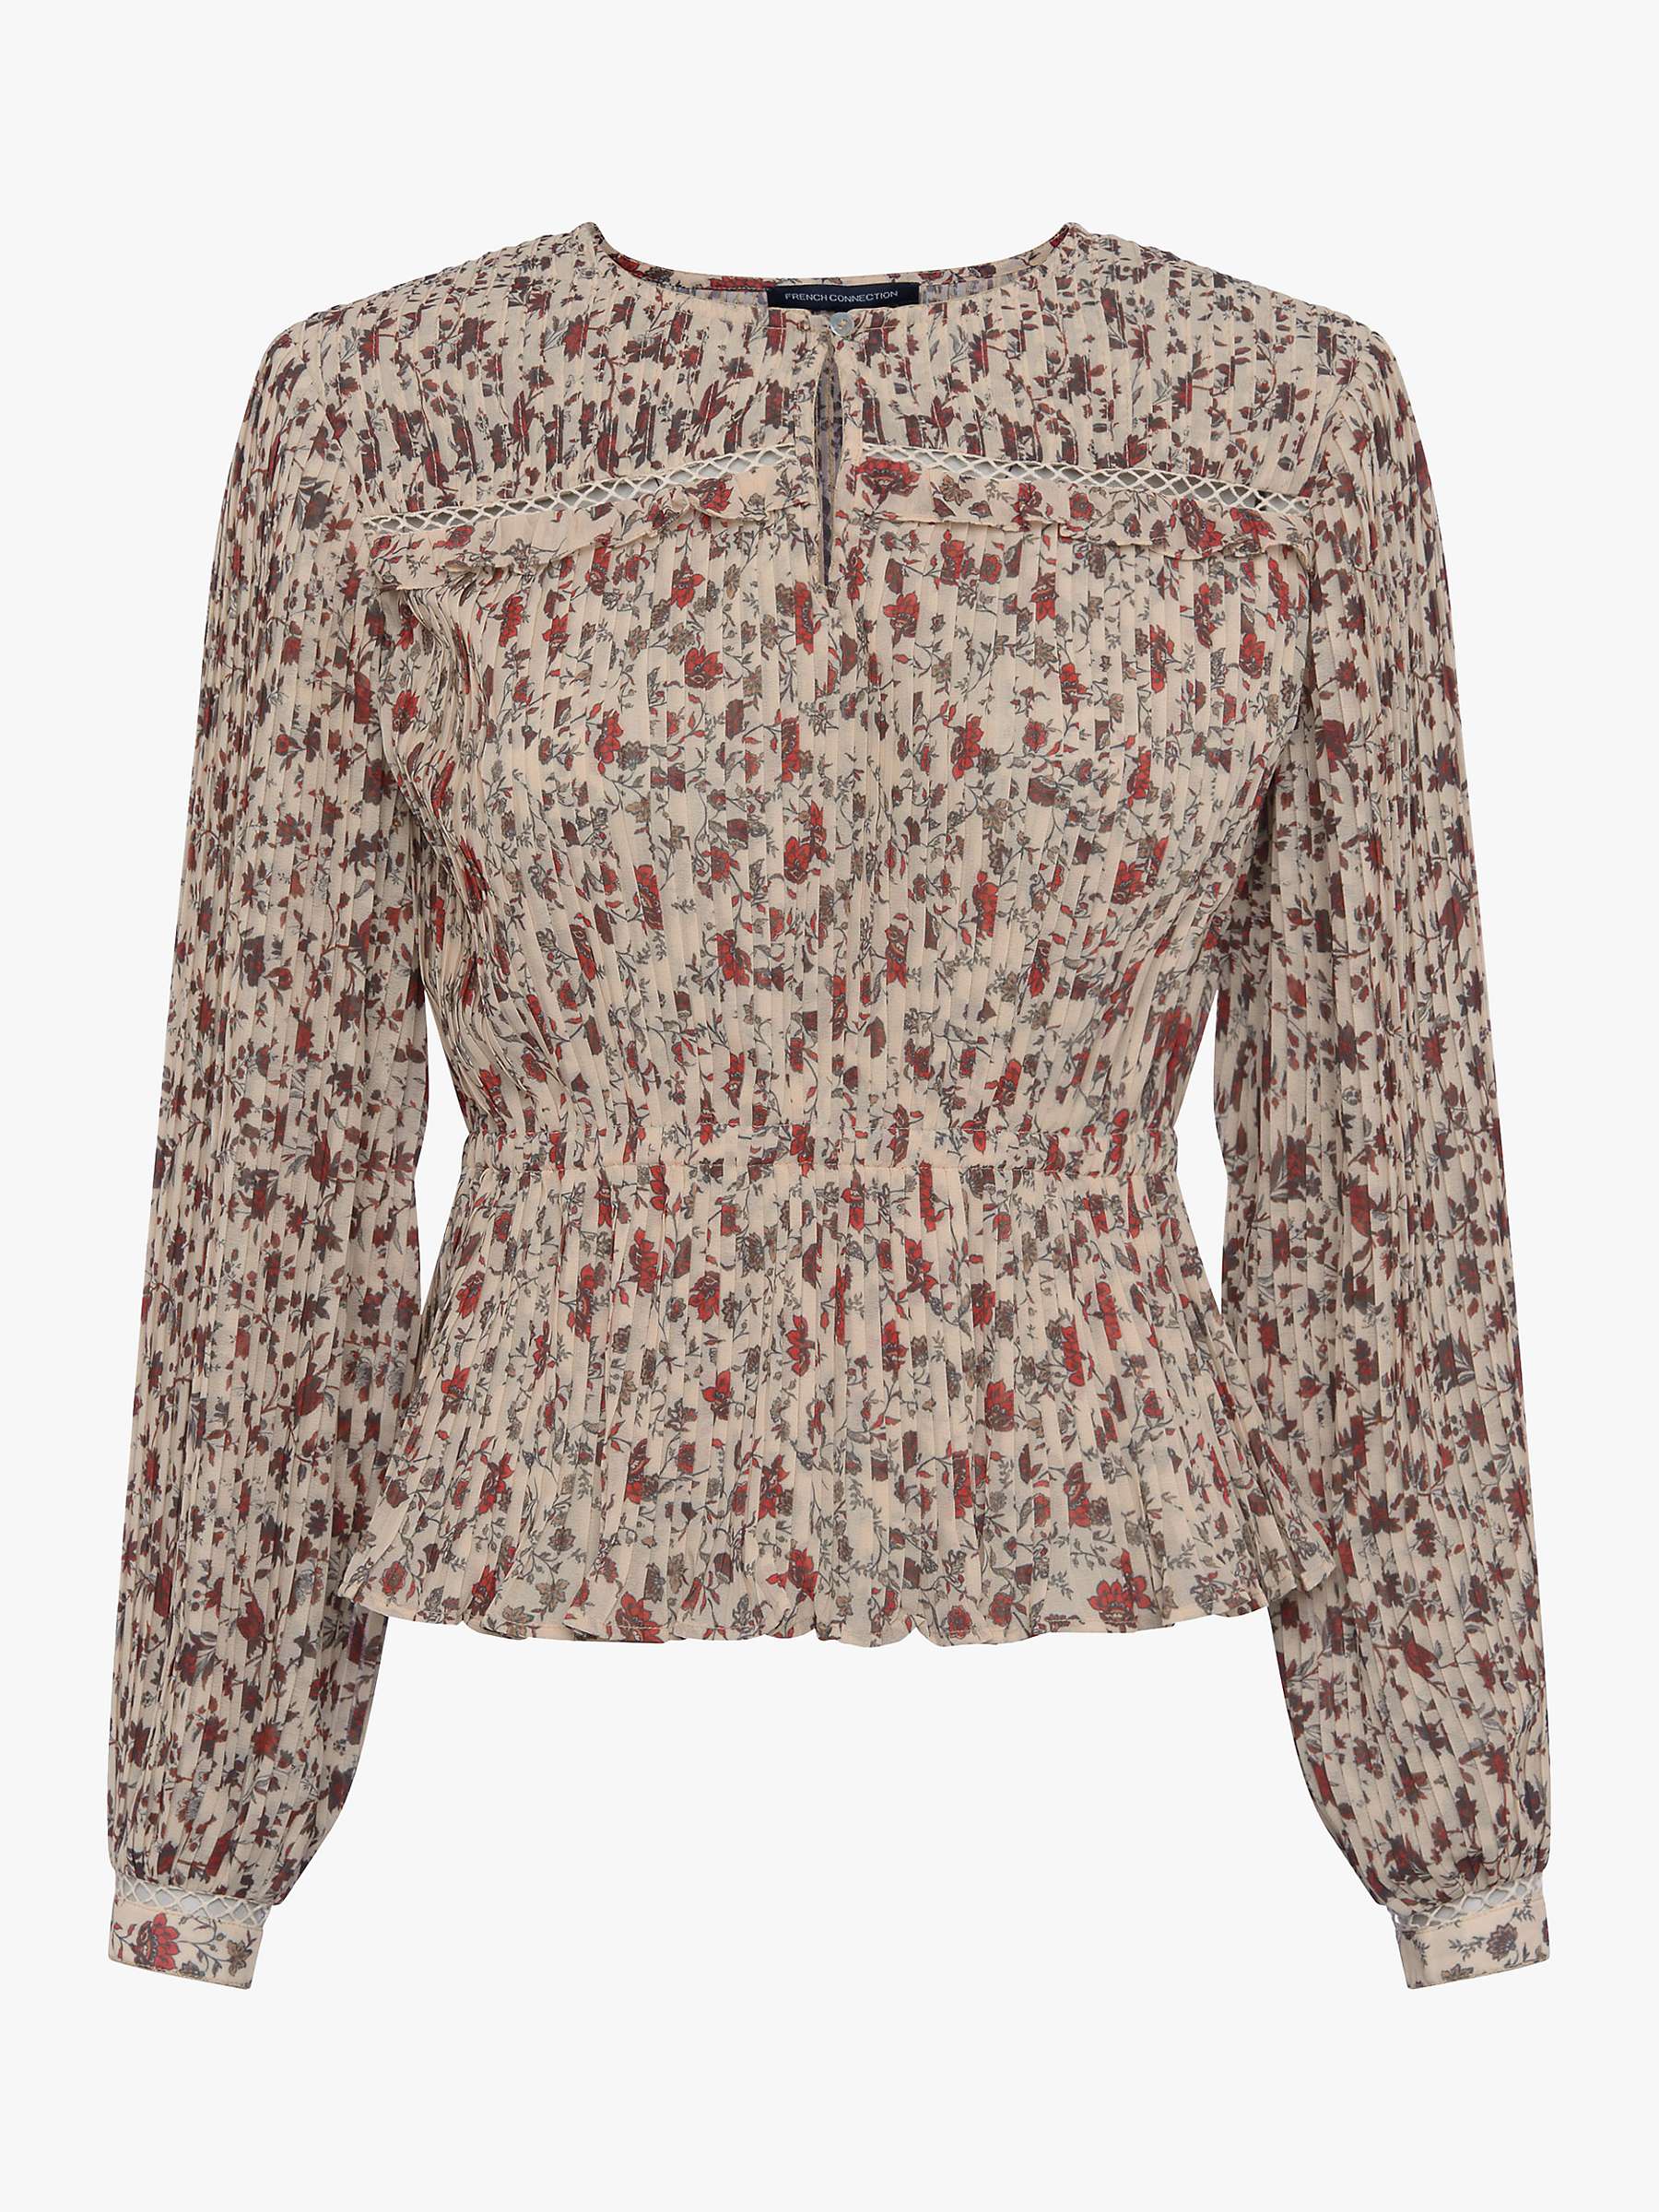 French Connection Alison Floral Top, Cream/Multi at John Lewis & Partners